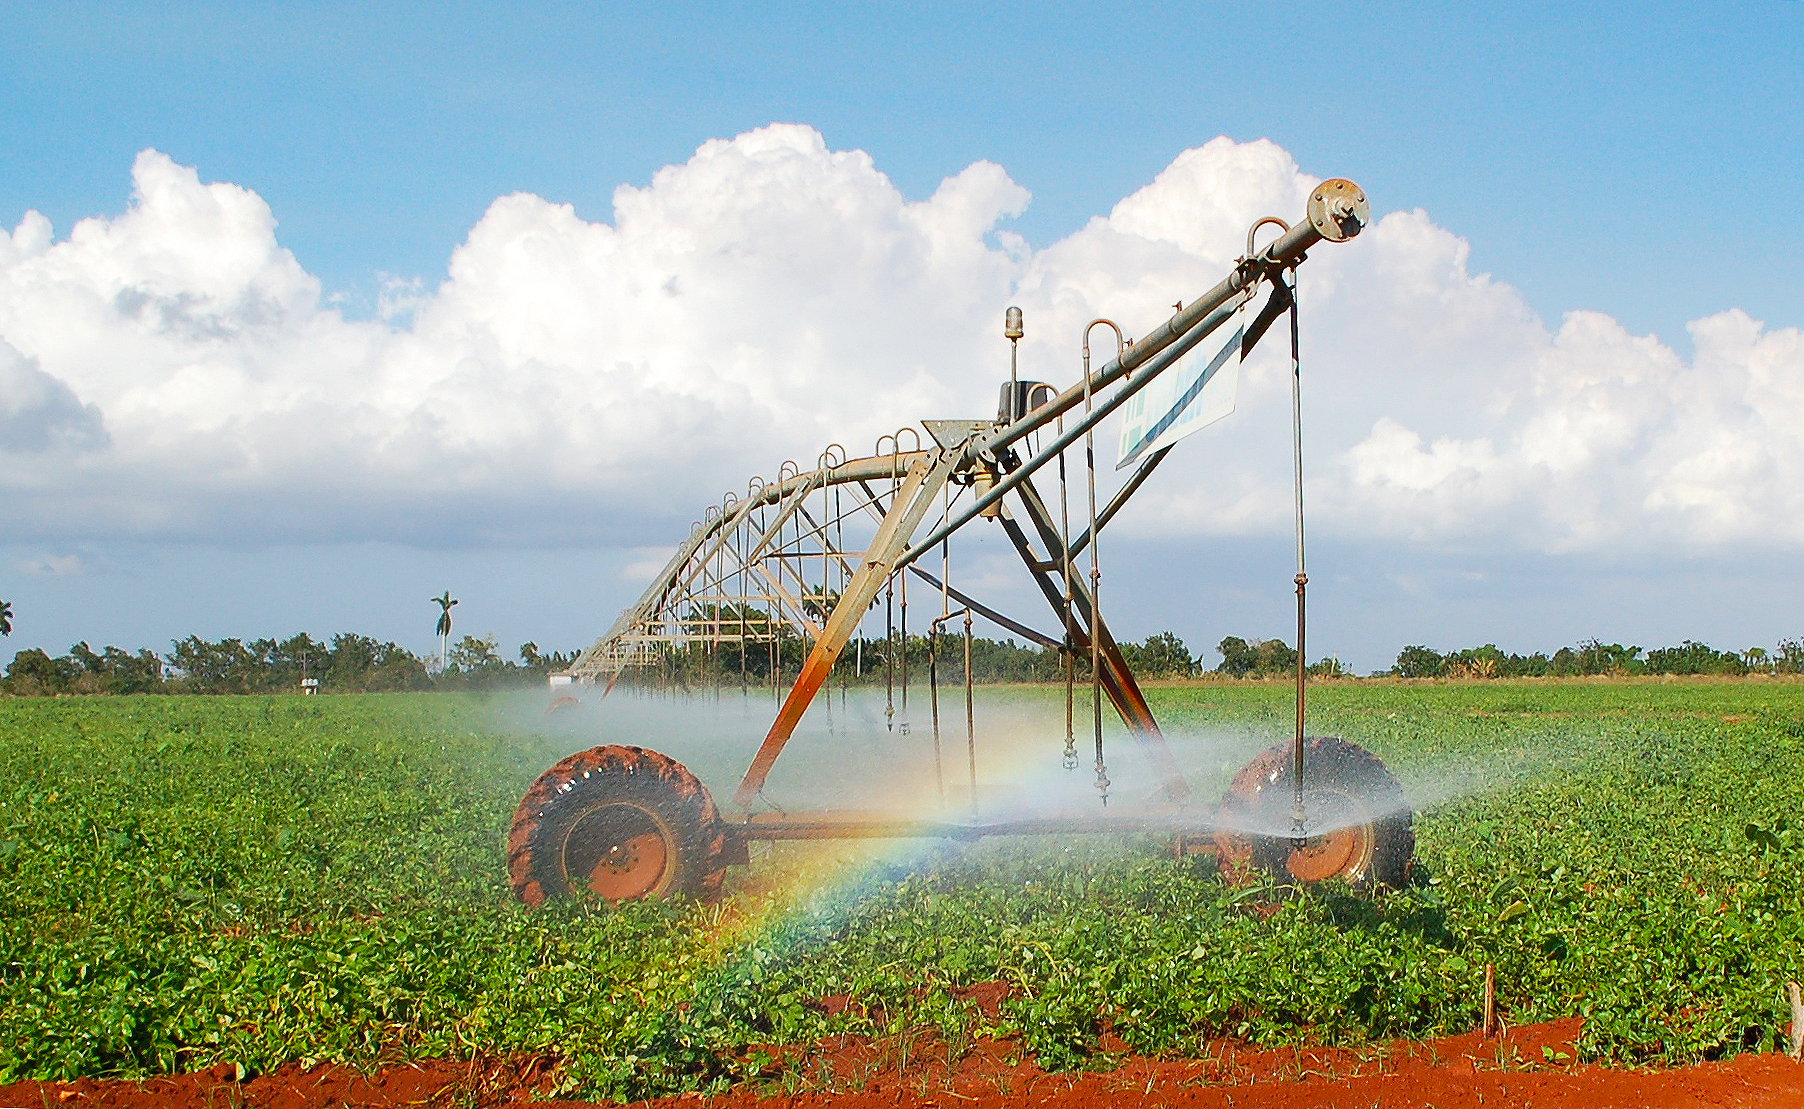 Circular irrigation system for agriculture; a rainbow forms as sun passes through water droplets.